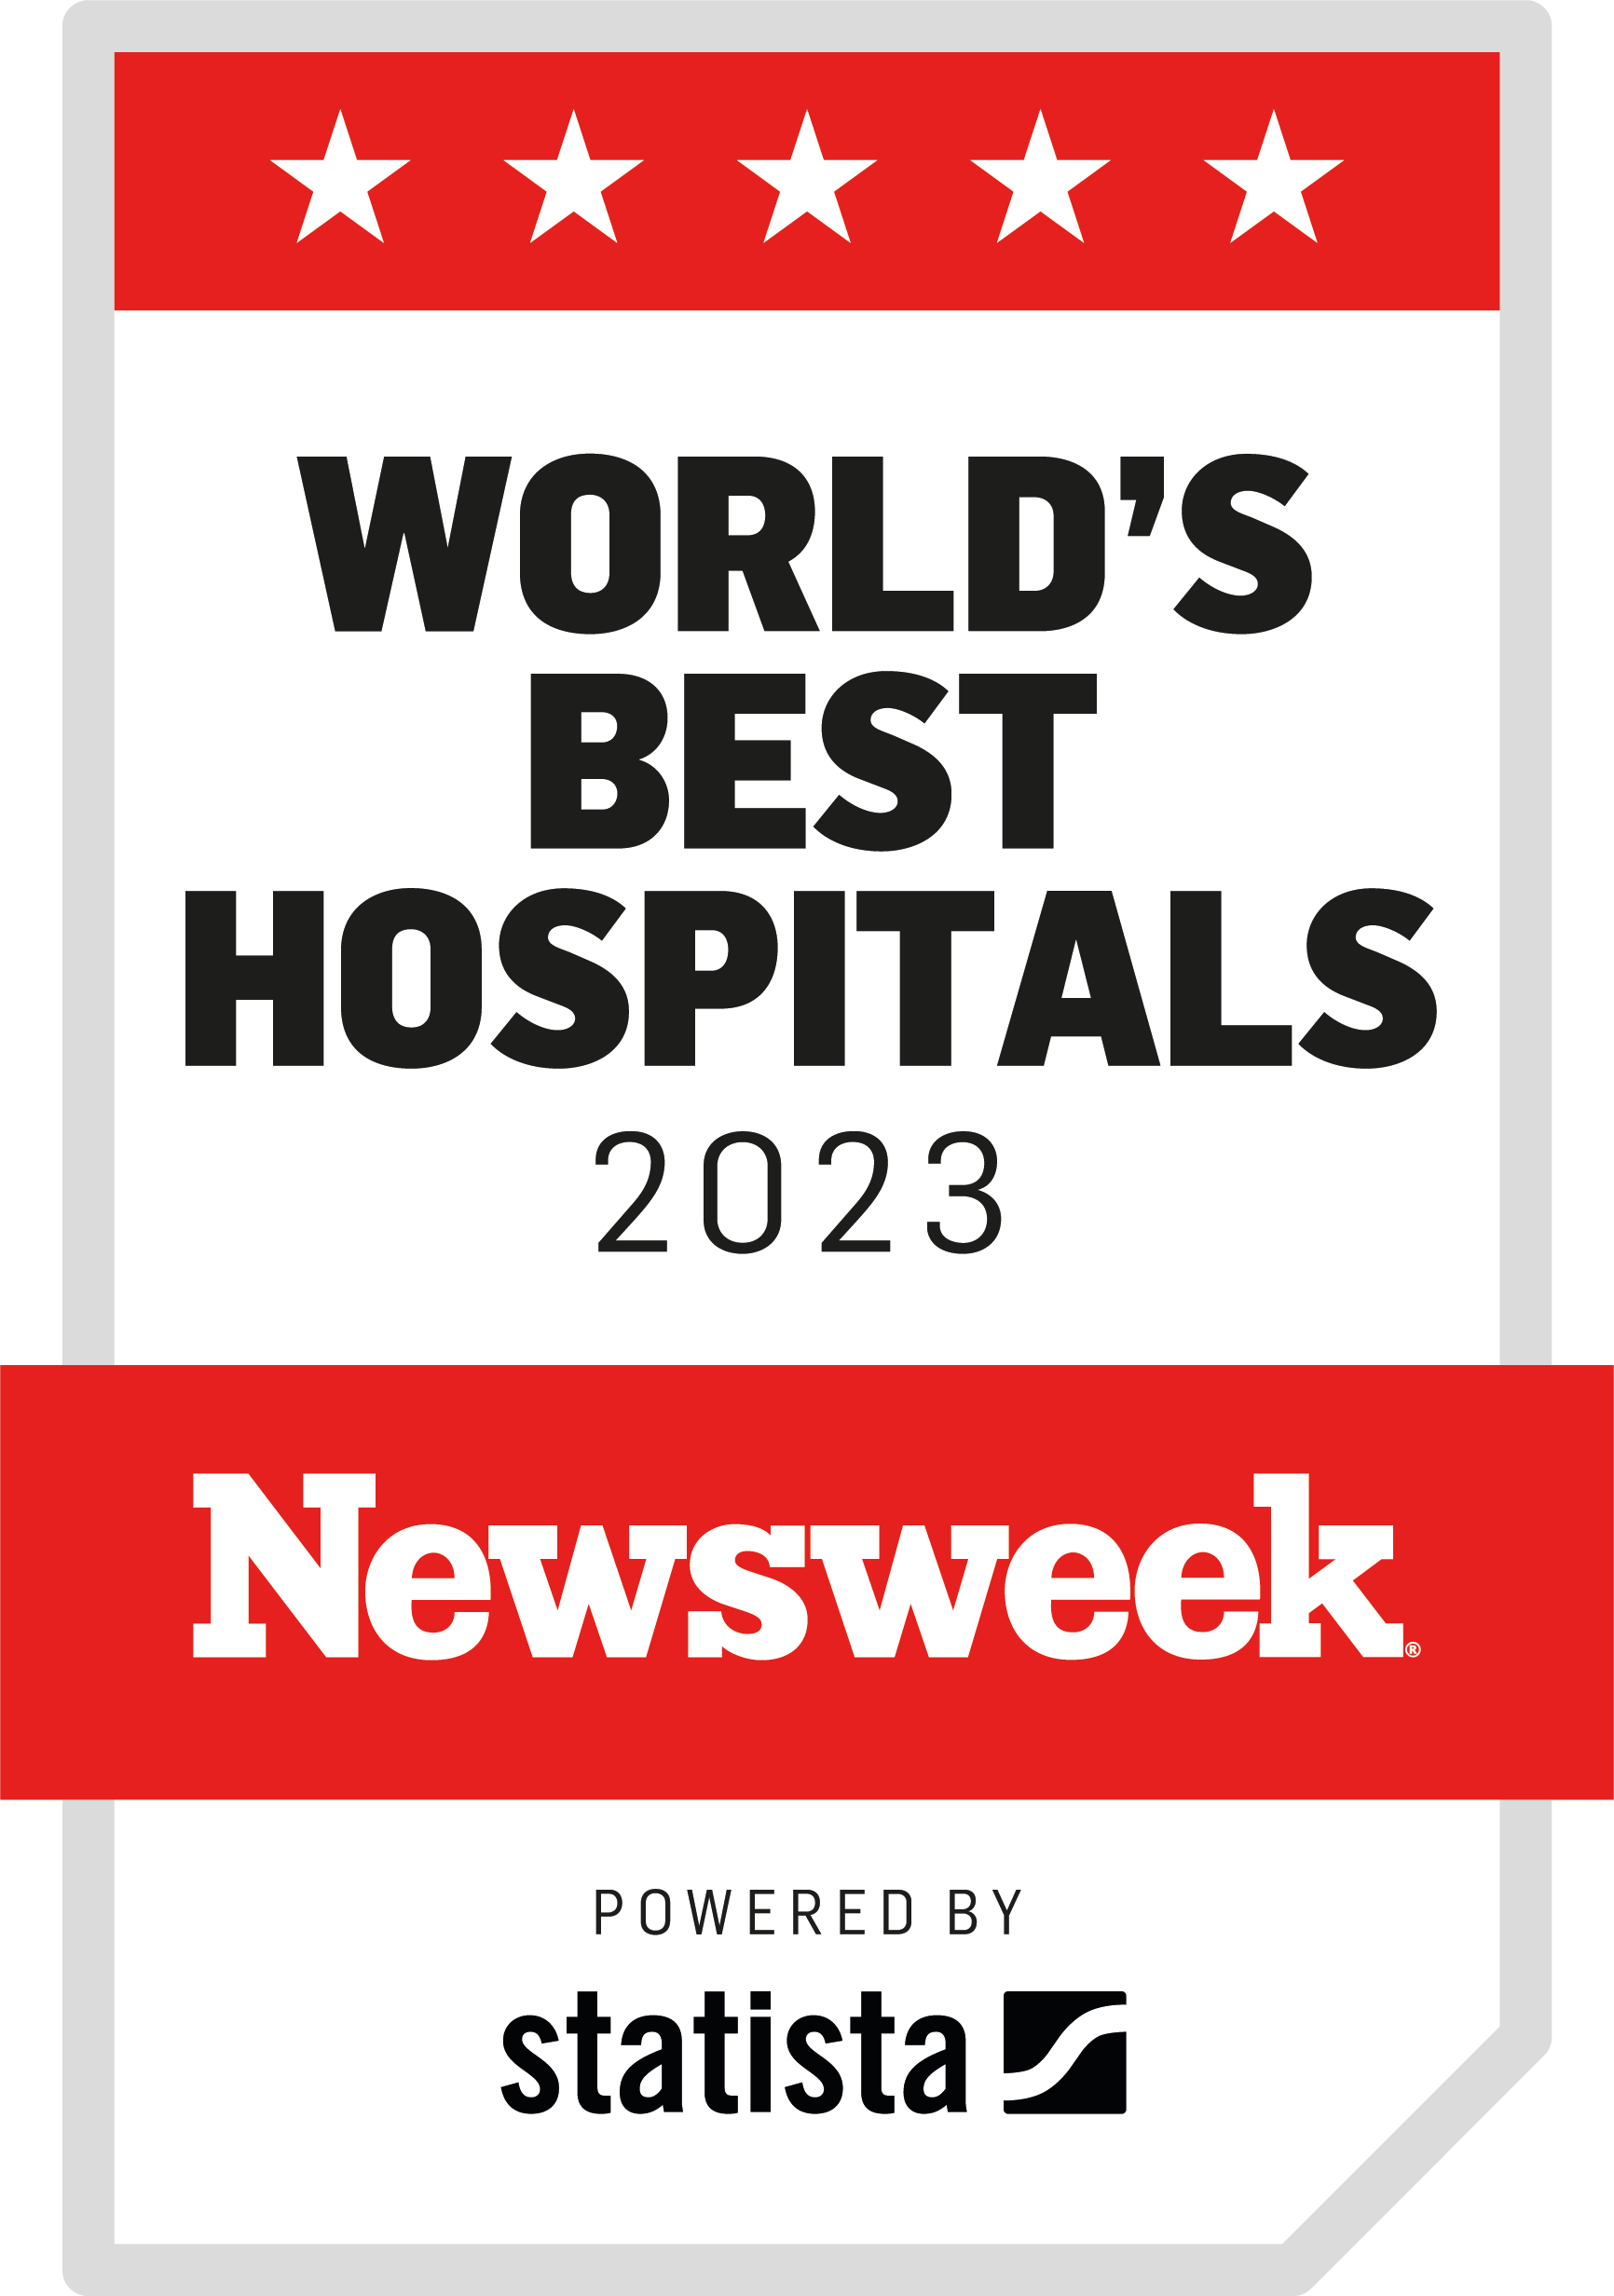 TGH Named to Newsweek's World's Best Hospitals 2022 List and One of